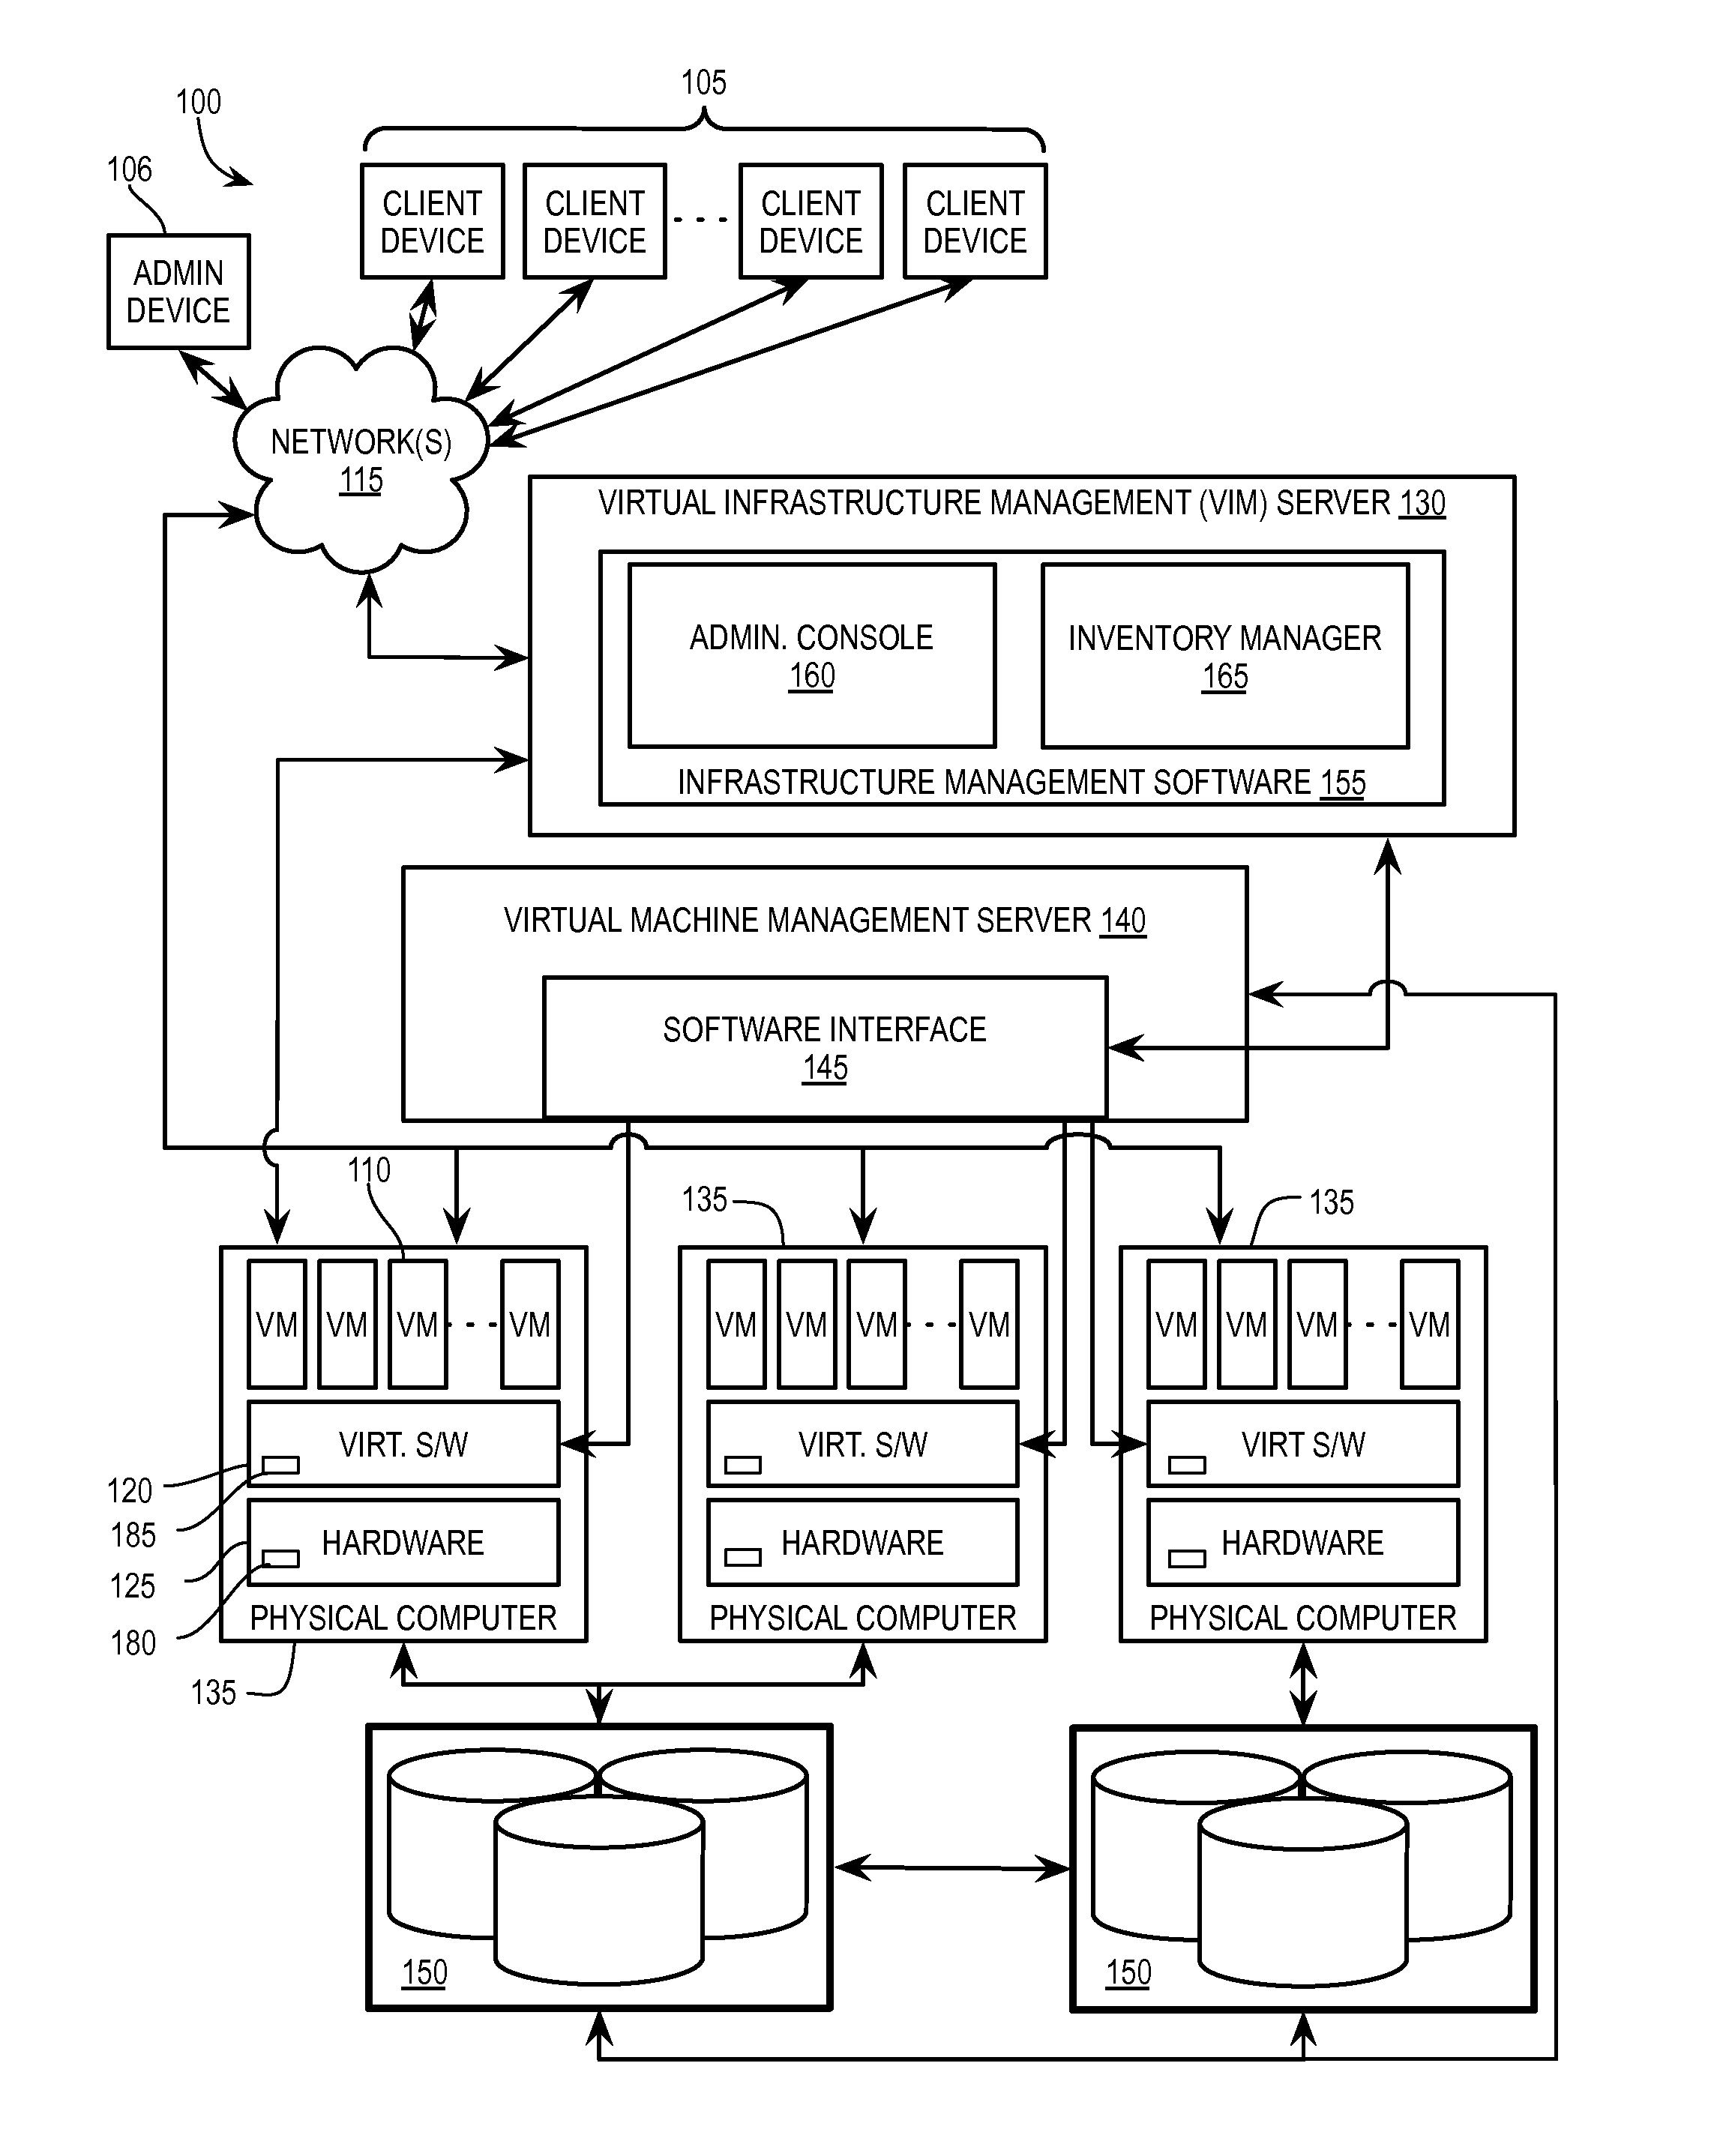 Replication of a write-back cache using a placeholder virtual machine for resource management